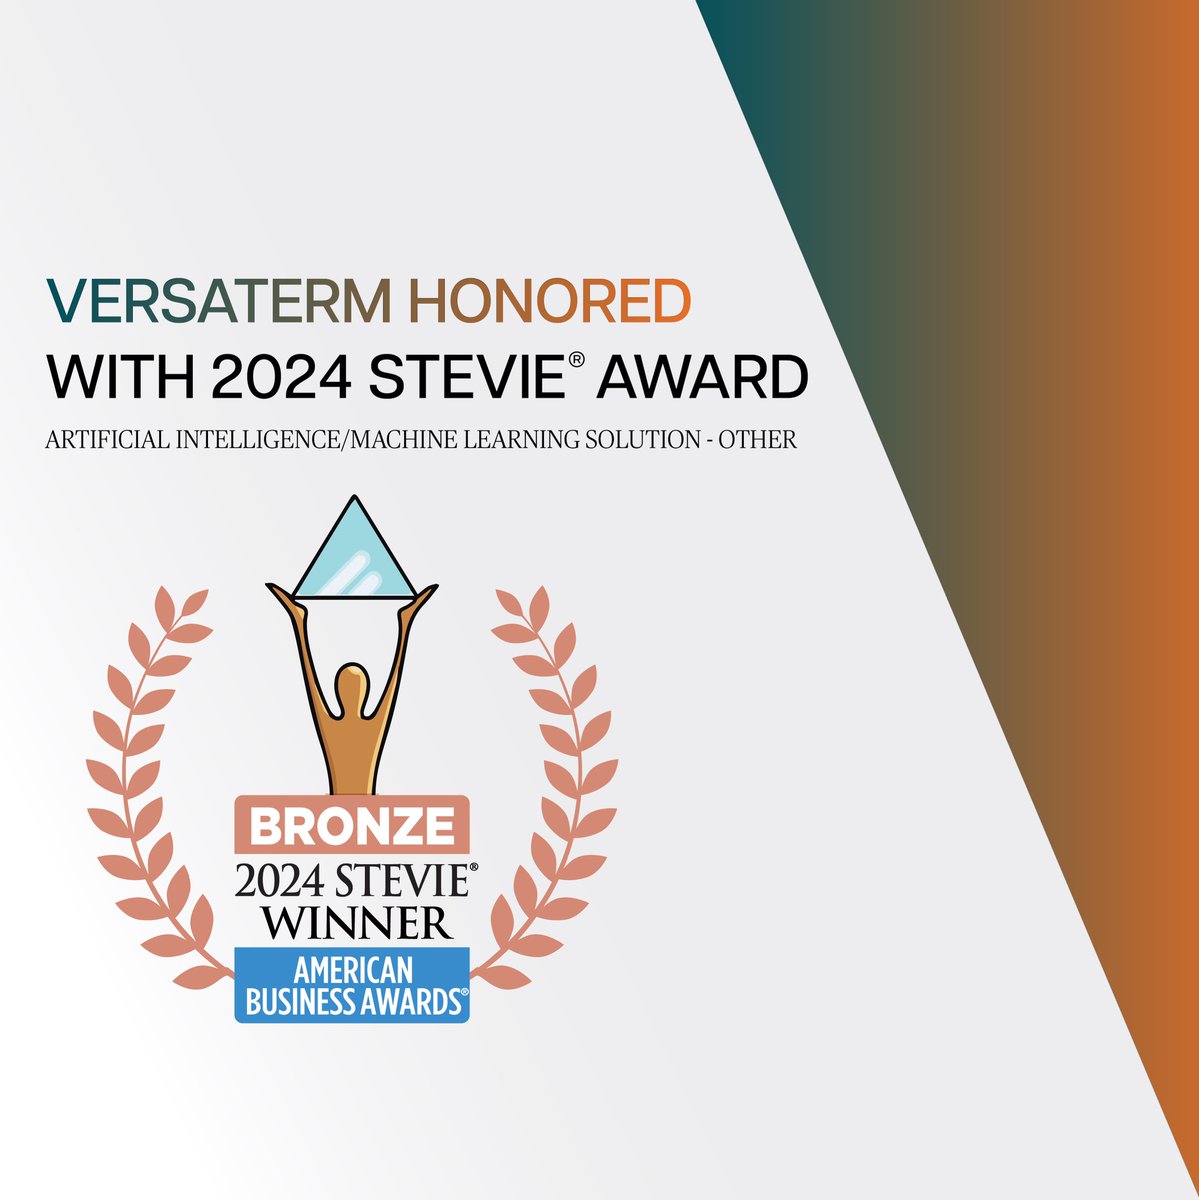 We are honored to be recognized as Bronze @TheStevieAwards winner in the 22nd Annual American Business Awards® for Artificial Intelligence/Machine Learning Solution - Other. Read more about the 2024 competition: okt.to/g5x1AS #TheStevieAwards #StevieWinner2024